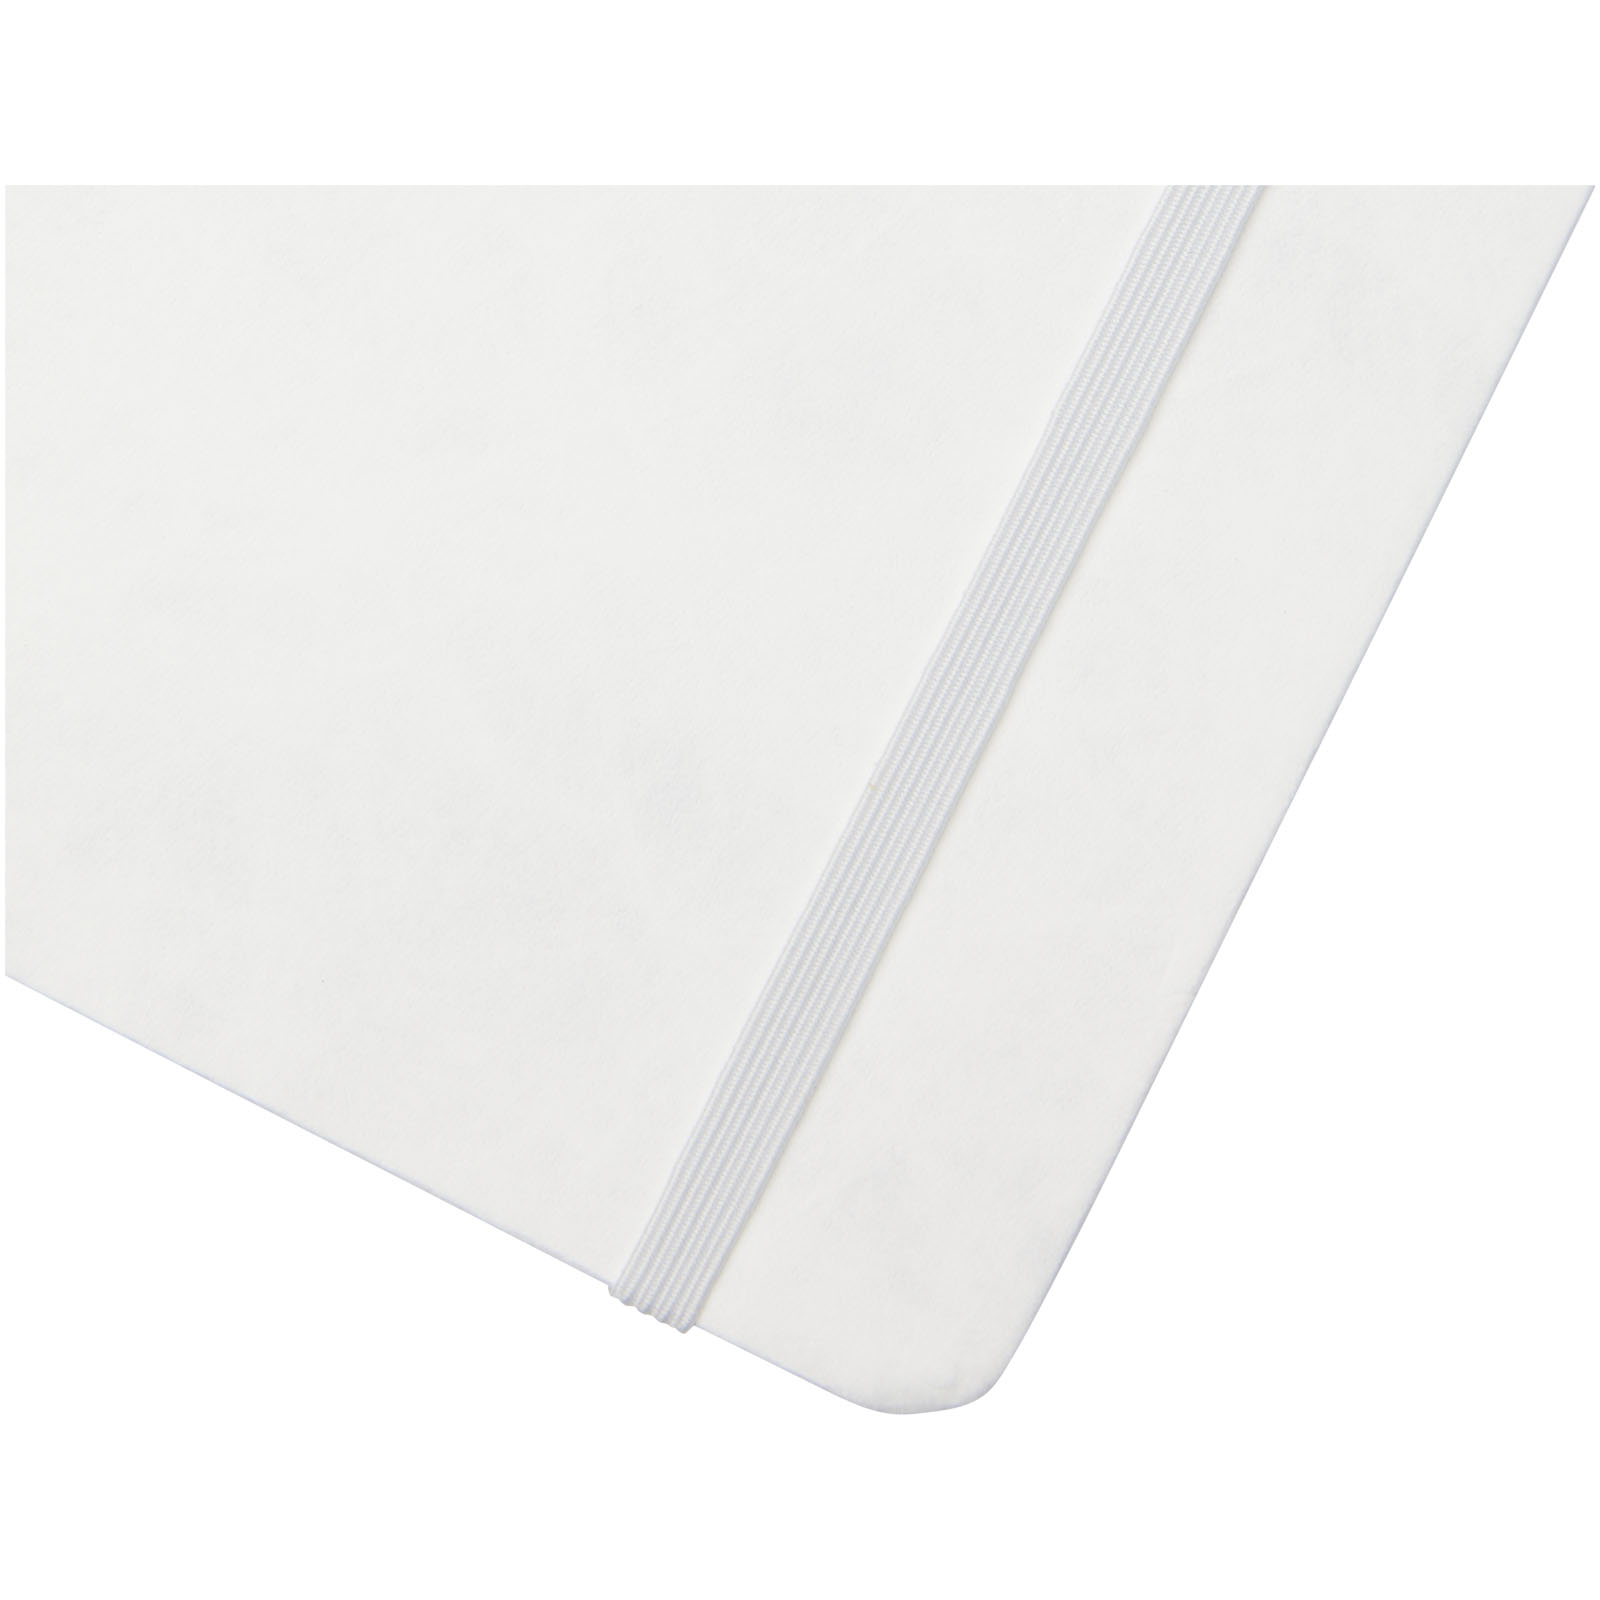 Advertising Hard cover notebooks - Breccia A5 stone paper notebook - 5